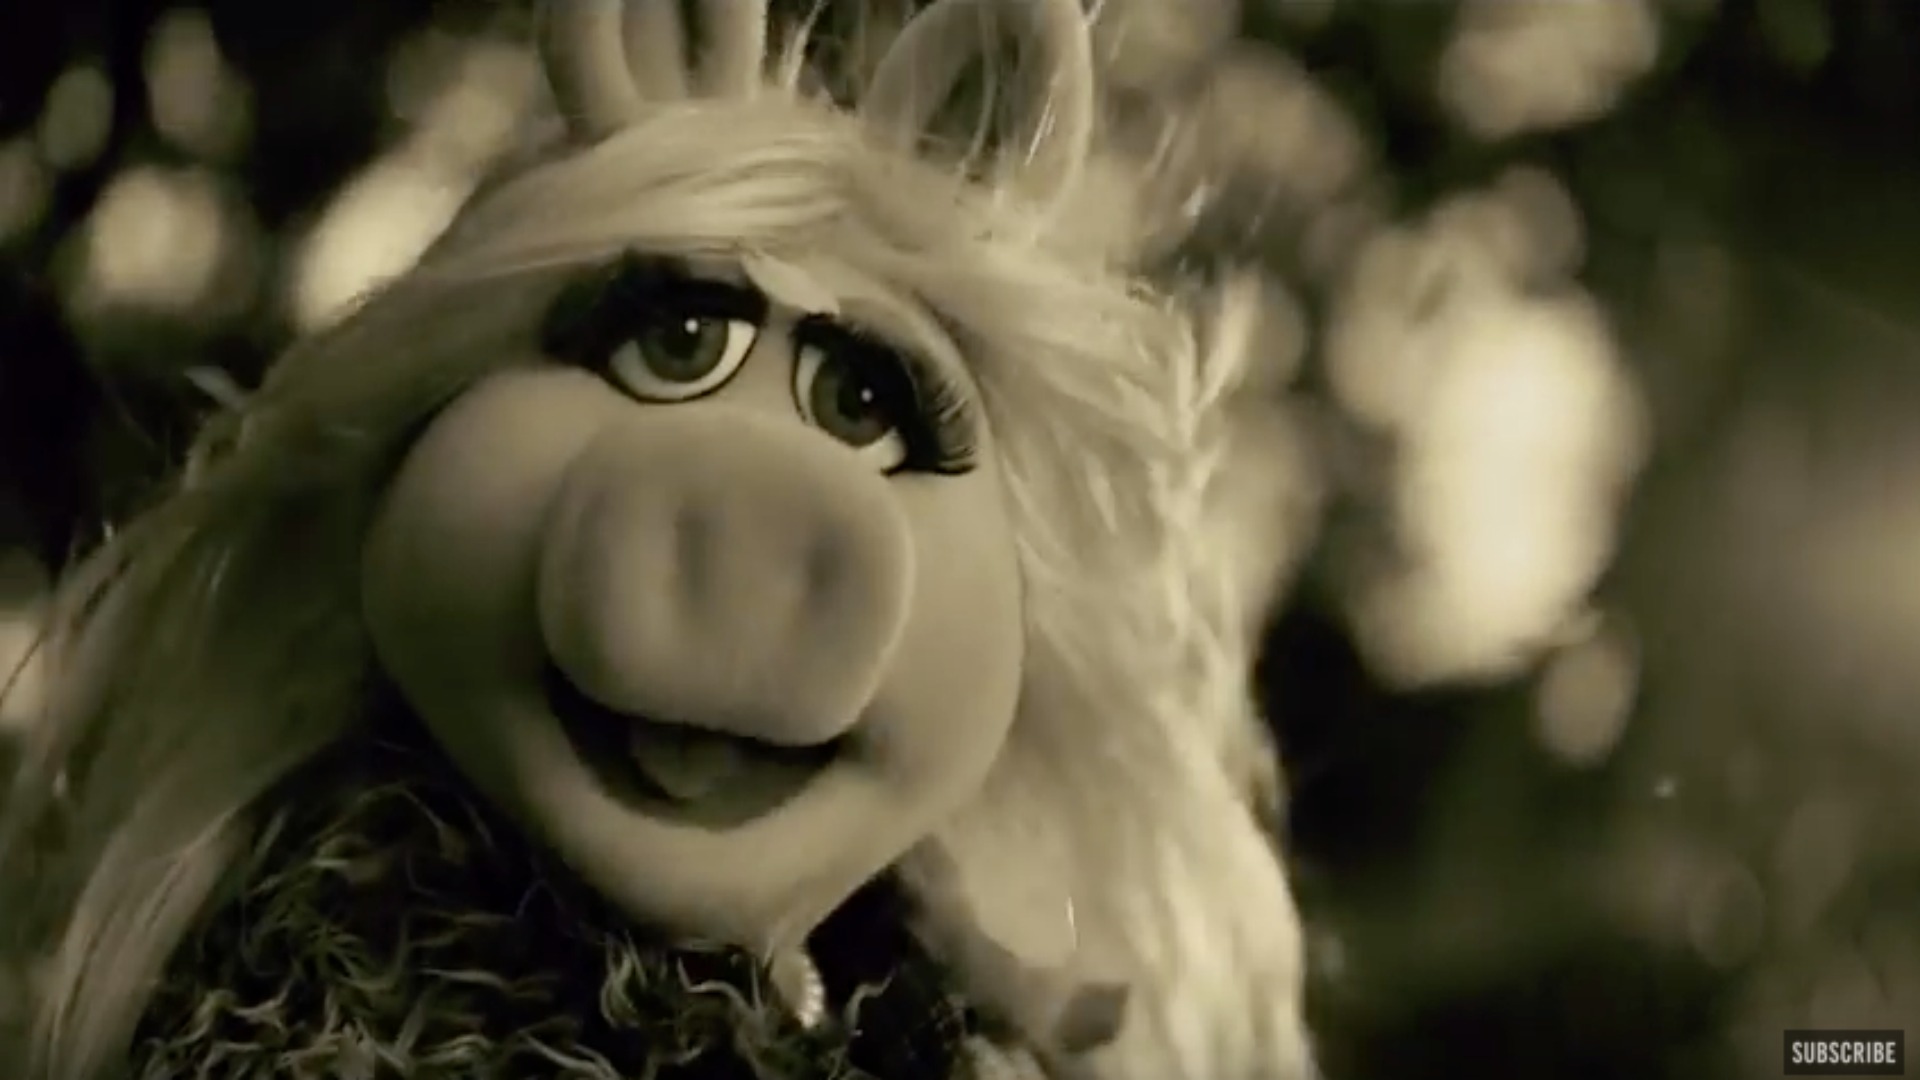 Miss Piggy Covers Adele S Hello To Prove Her Love For Kermit